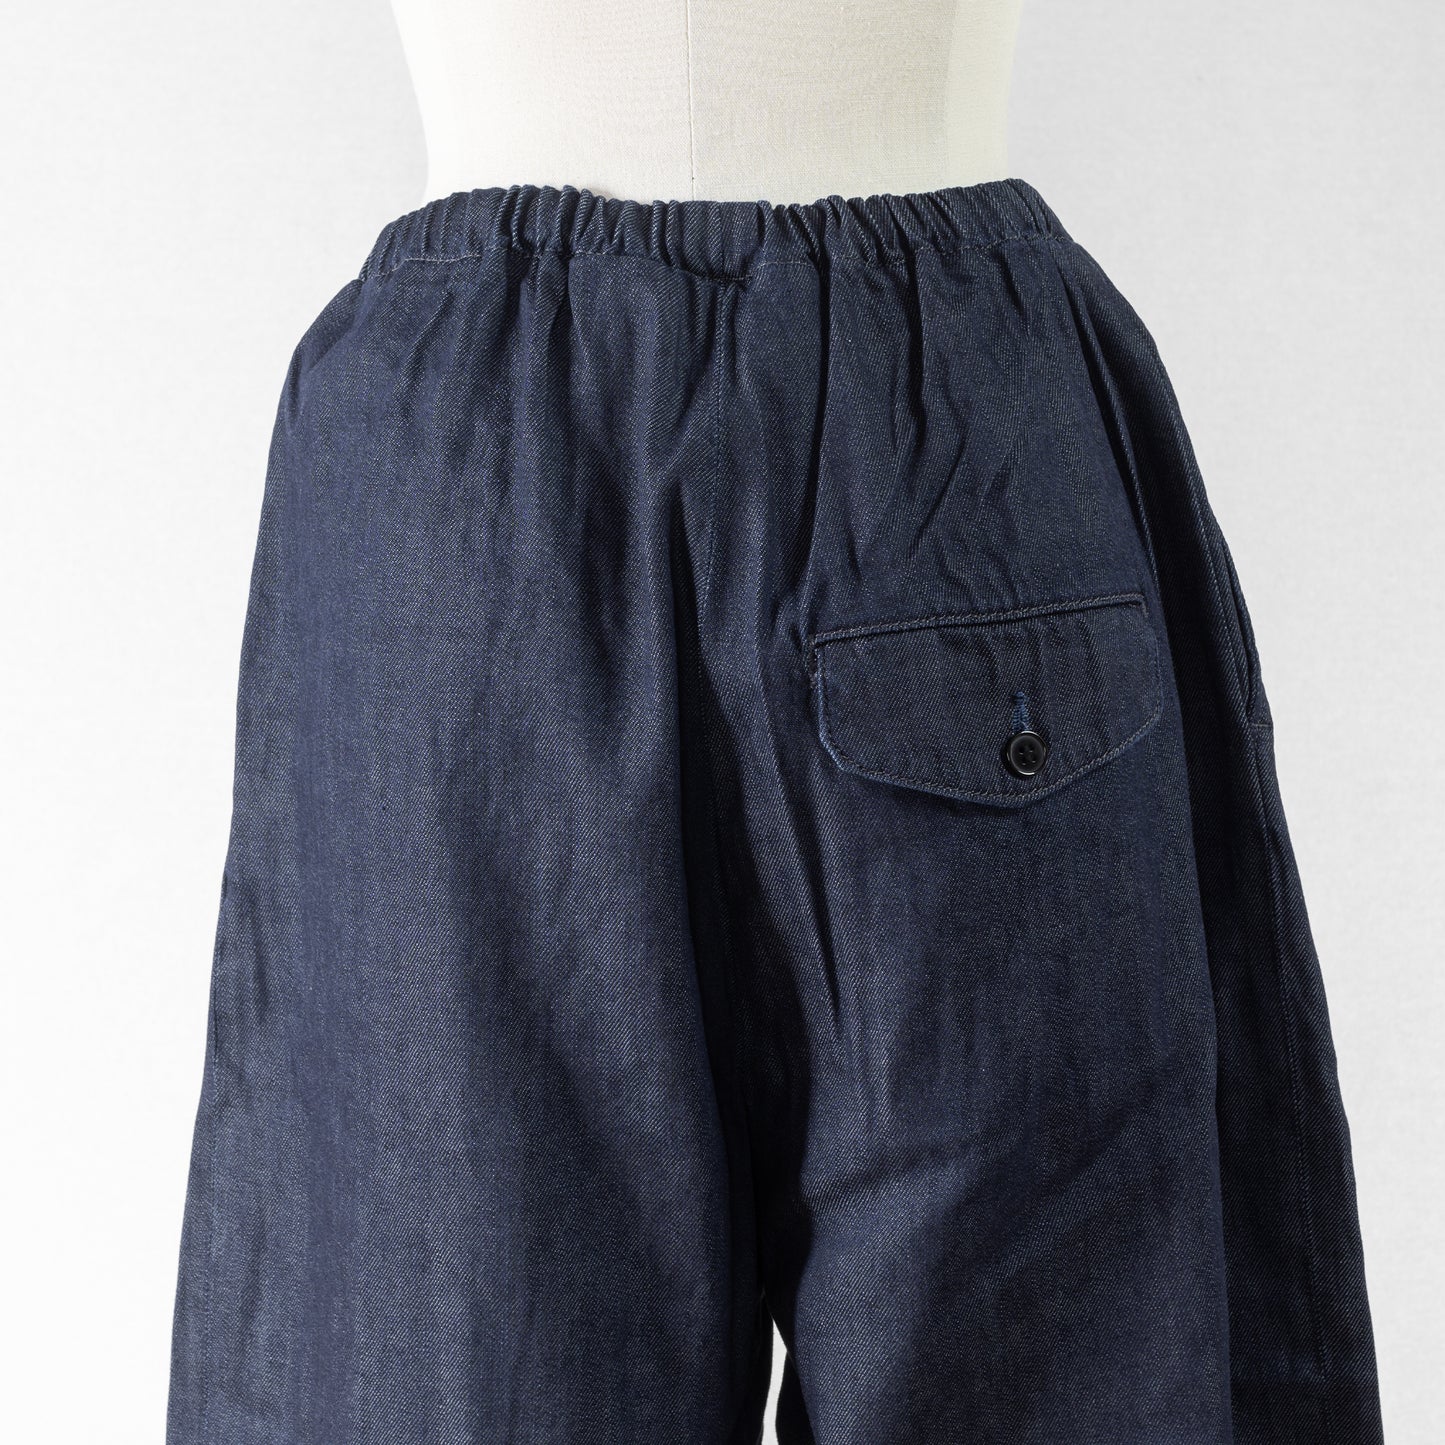 STAMP AND DIARY WAIST TUCK DENIM WIDE PANTS 91cm